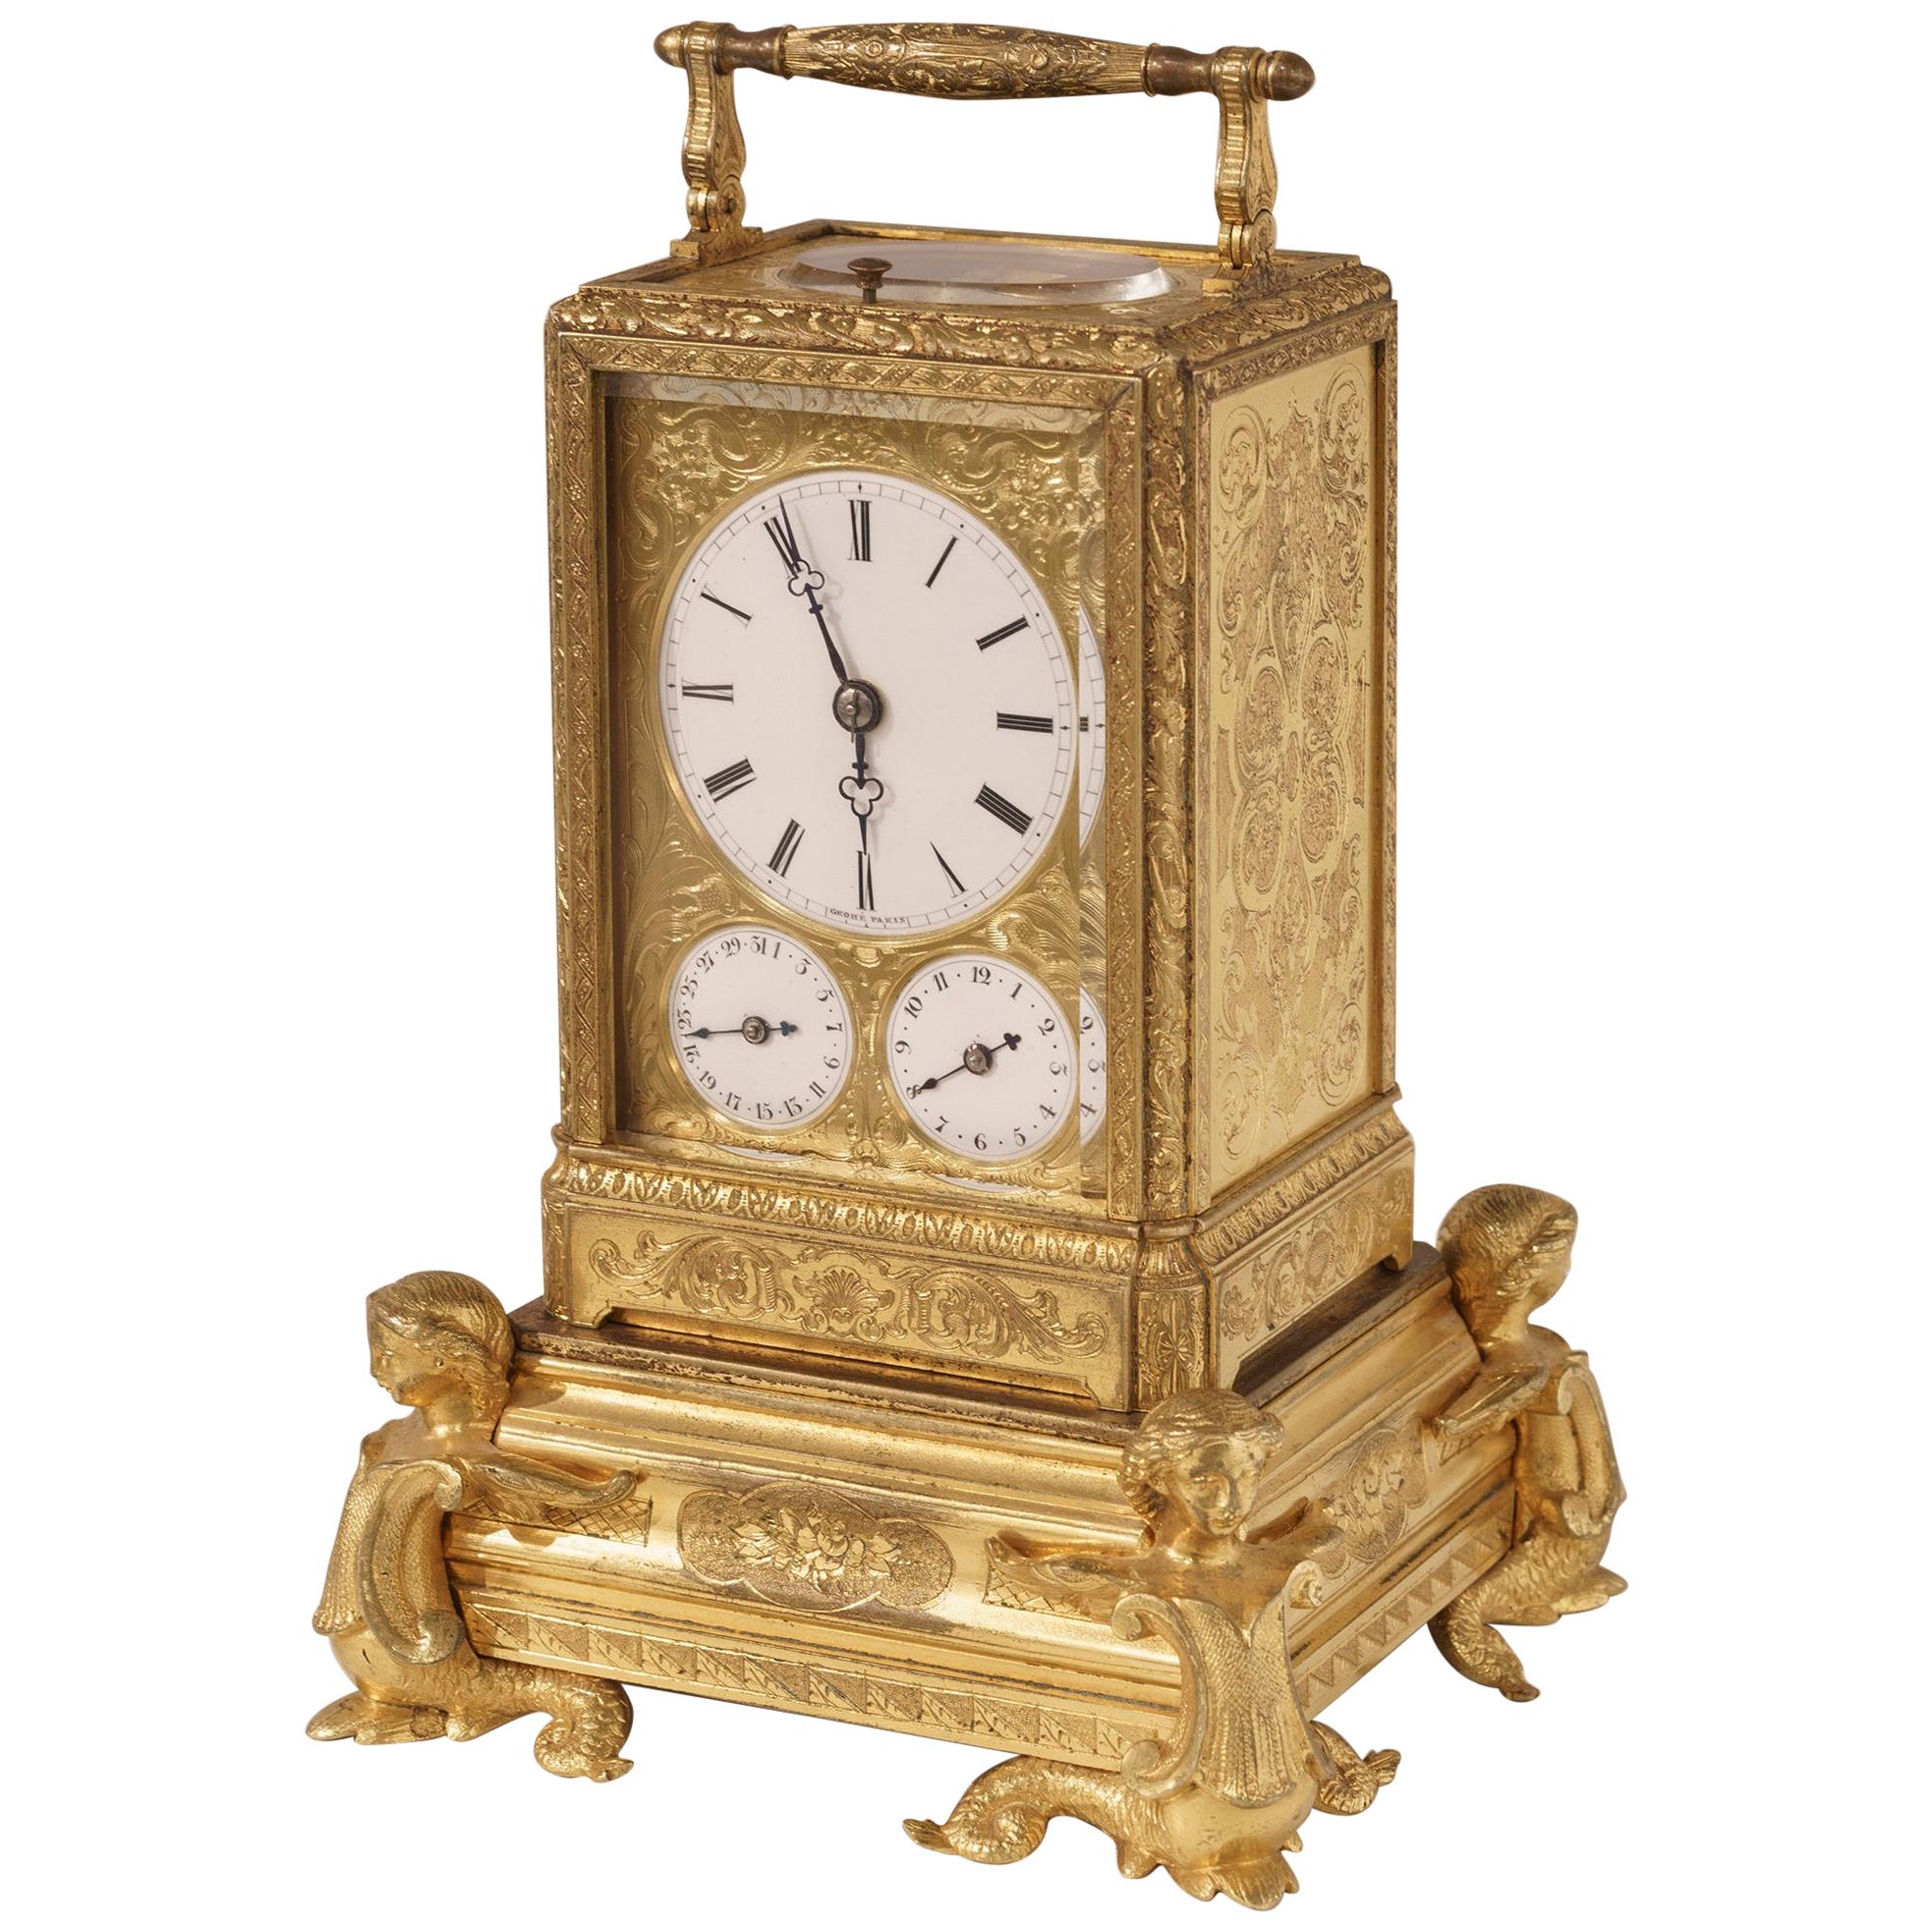 French Petite Sonnerie Gilt Bronze Carriage Clock by Grohé of Paris